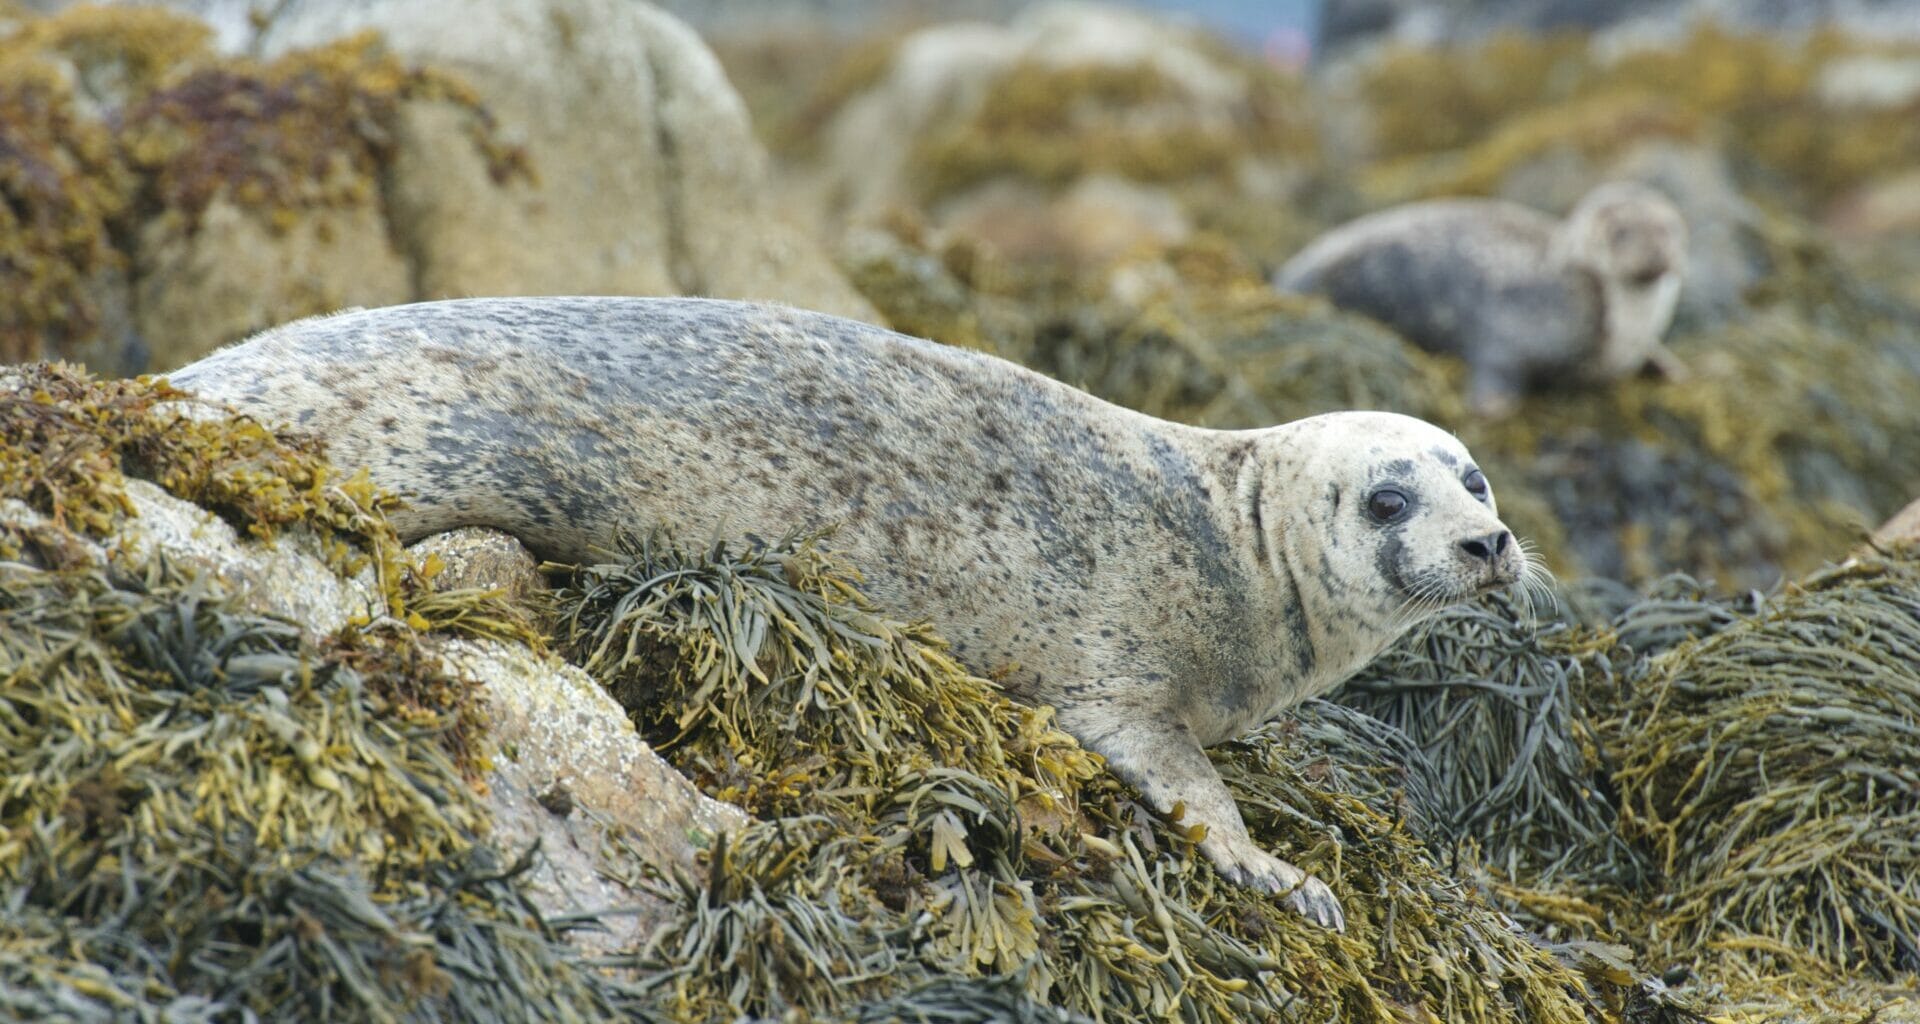 Marine protection: The Scottish species in decline 4